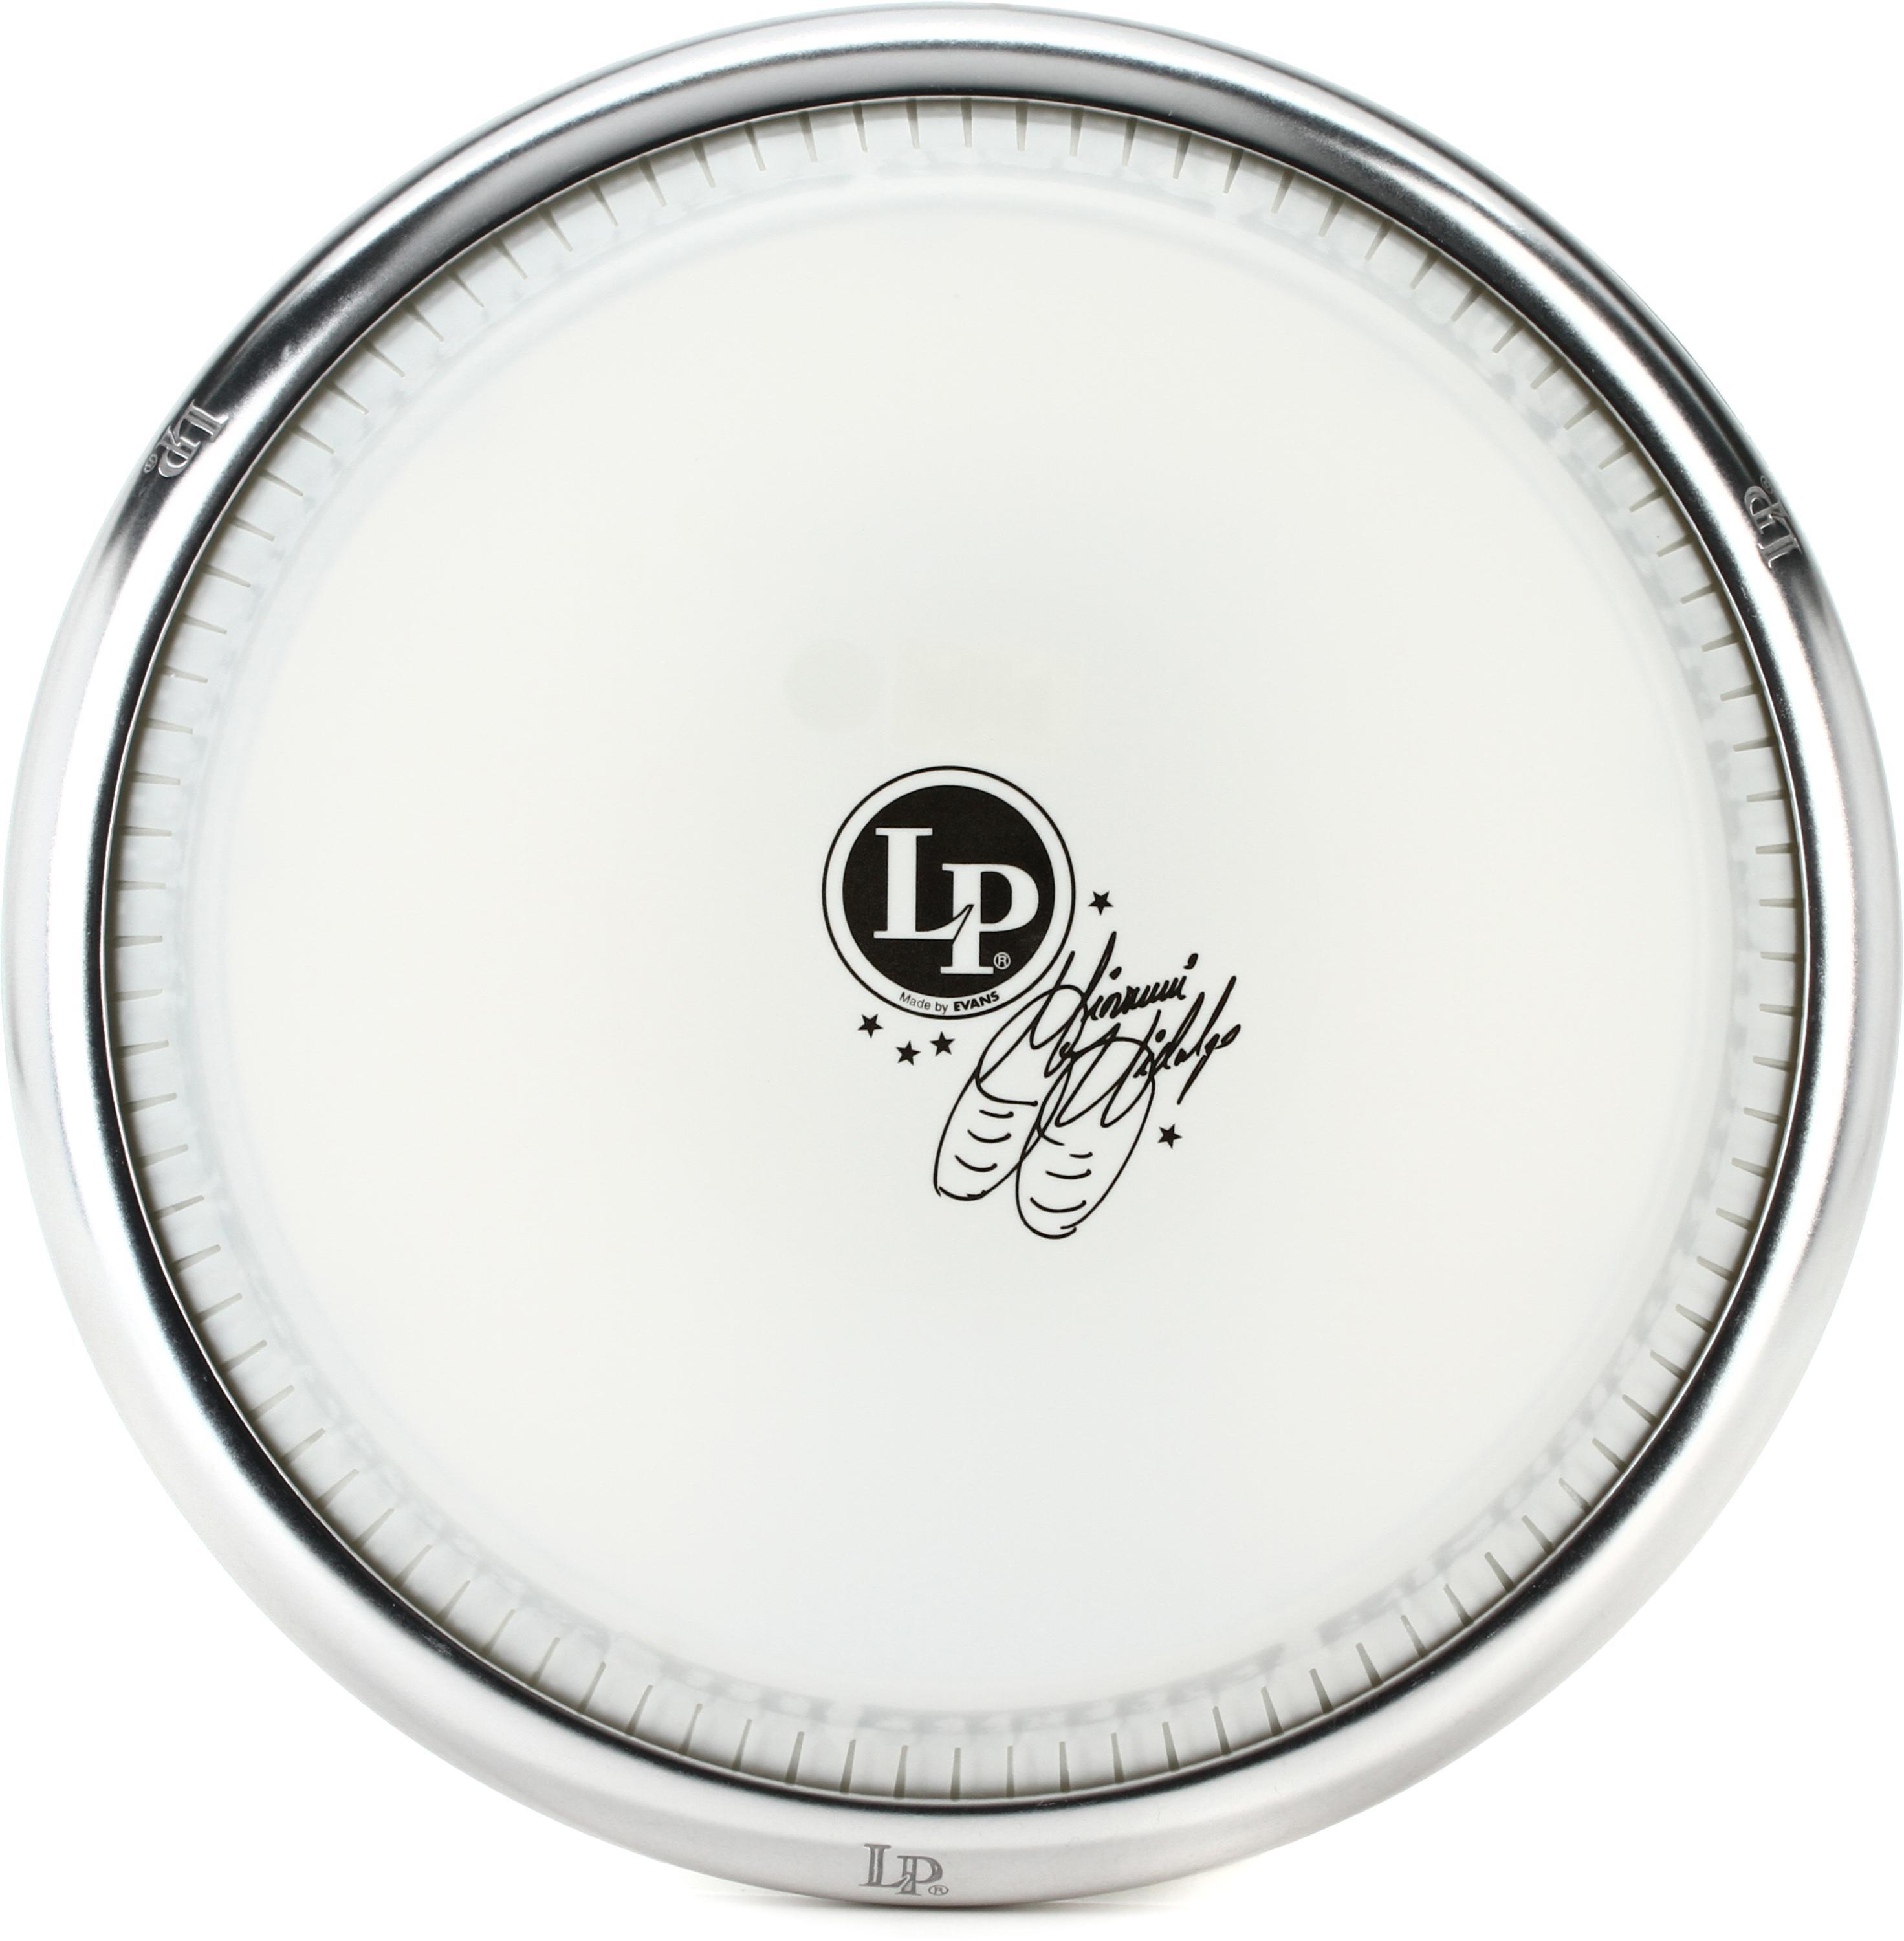 Latin Percussion Giovanni Compact Conga - 11 inch | Sweetwater